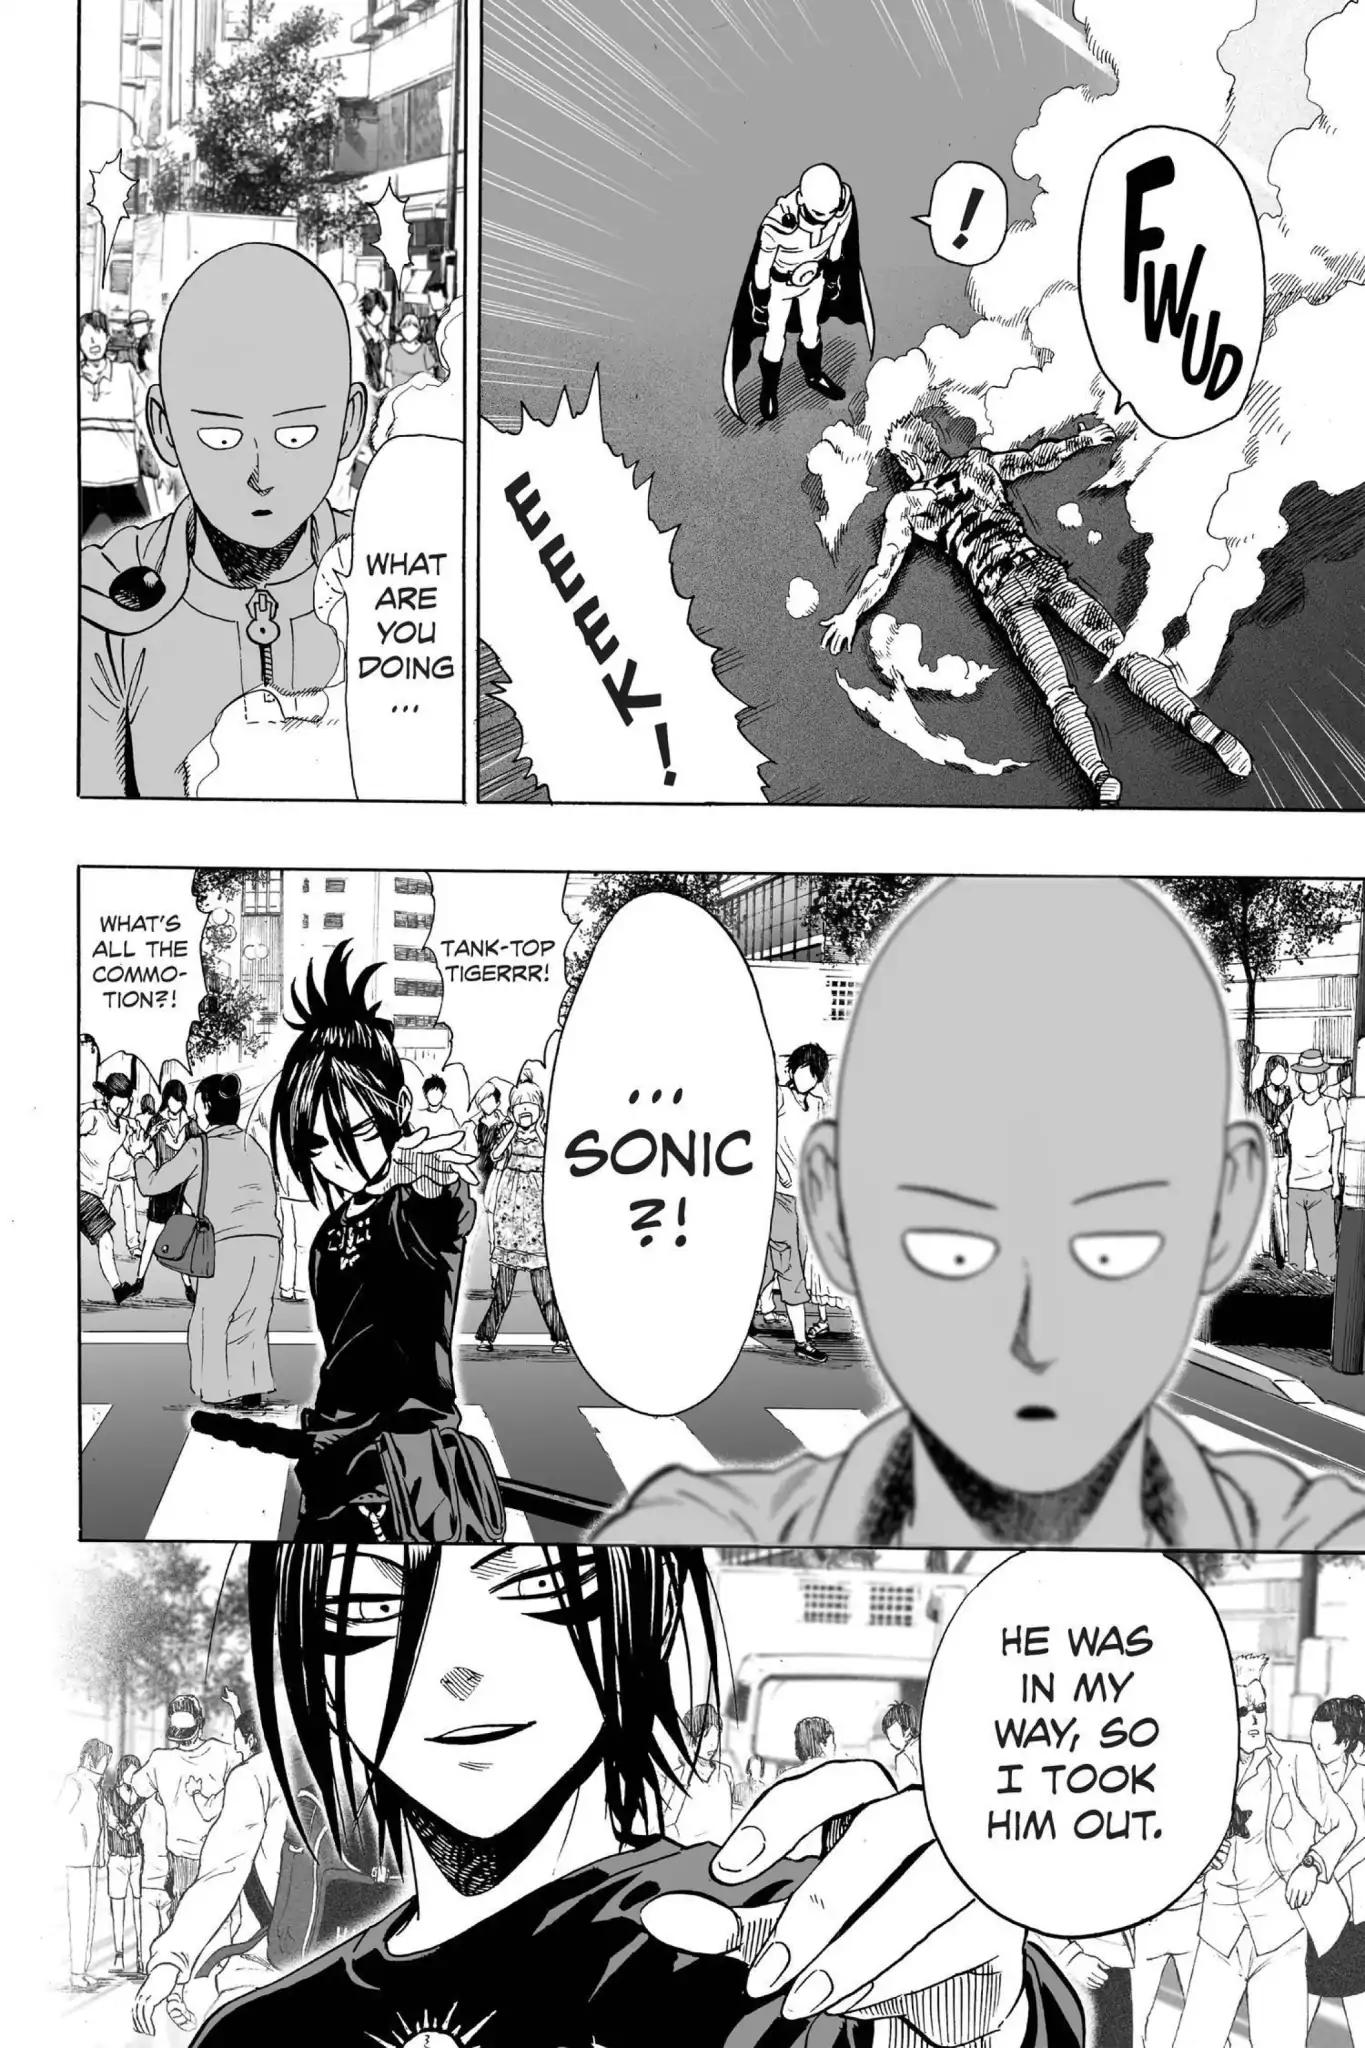 One-Punch Man chapter 19 page 14